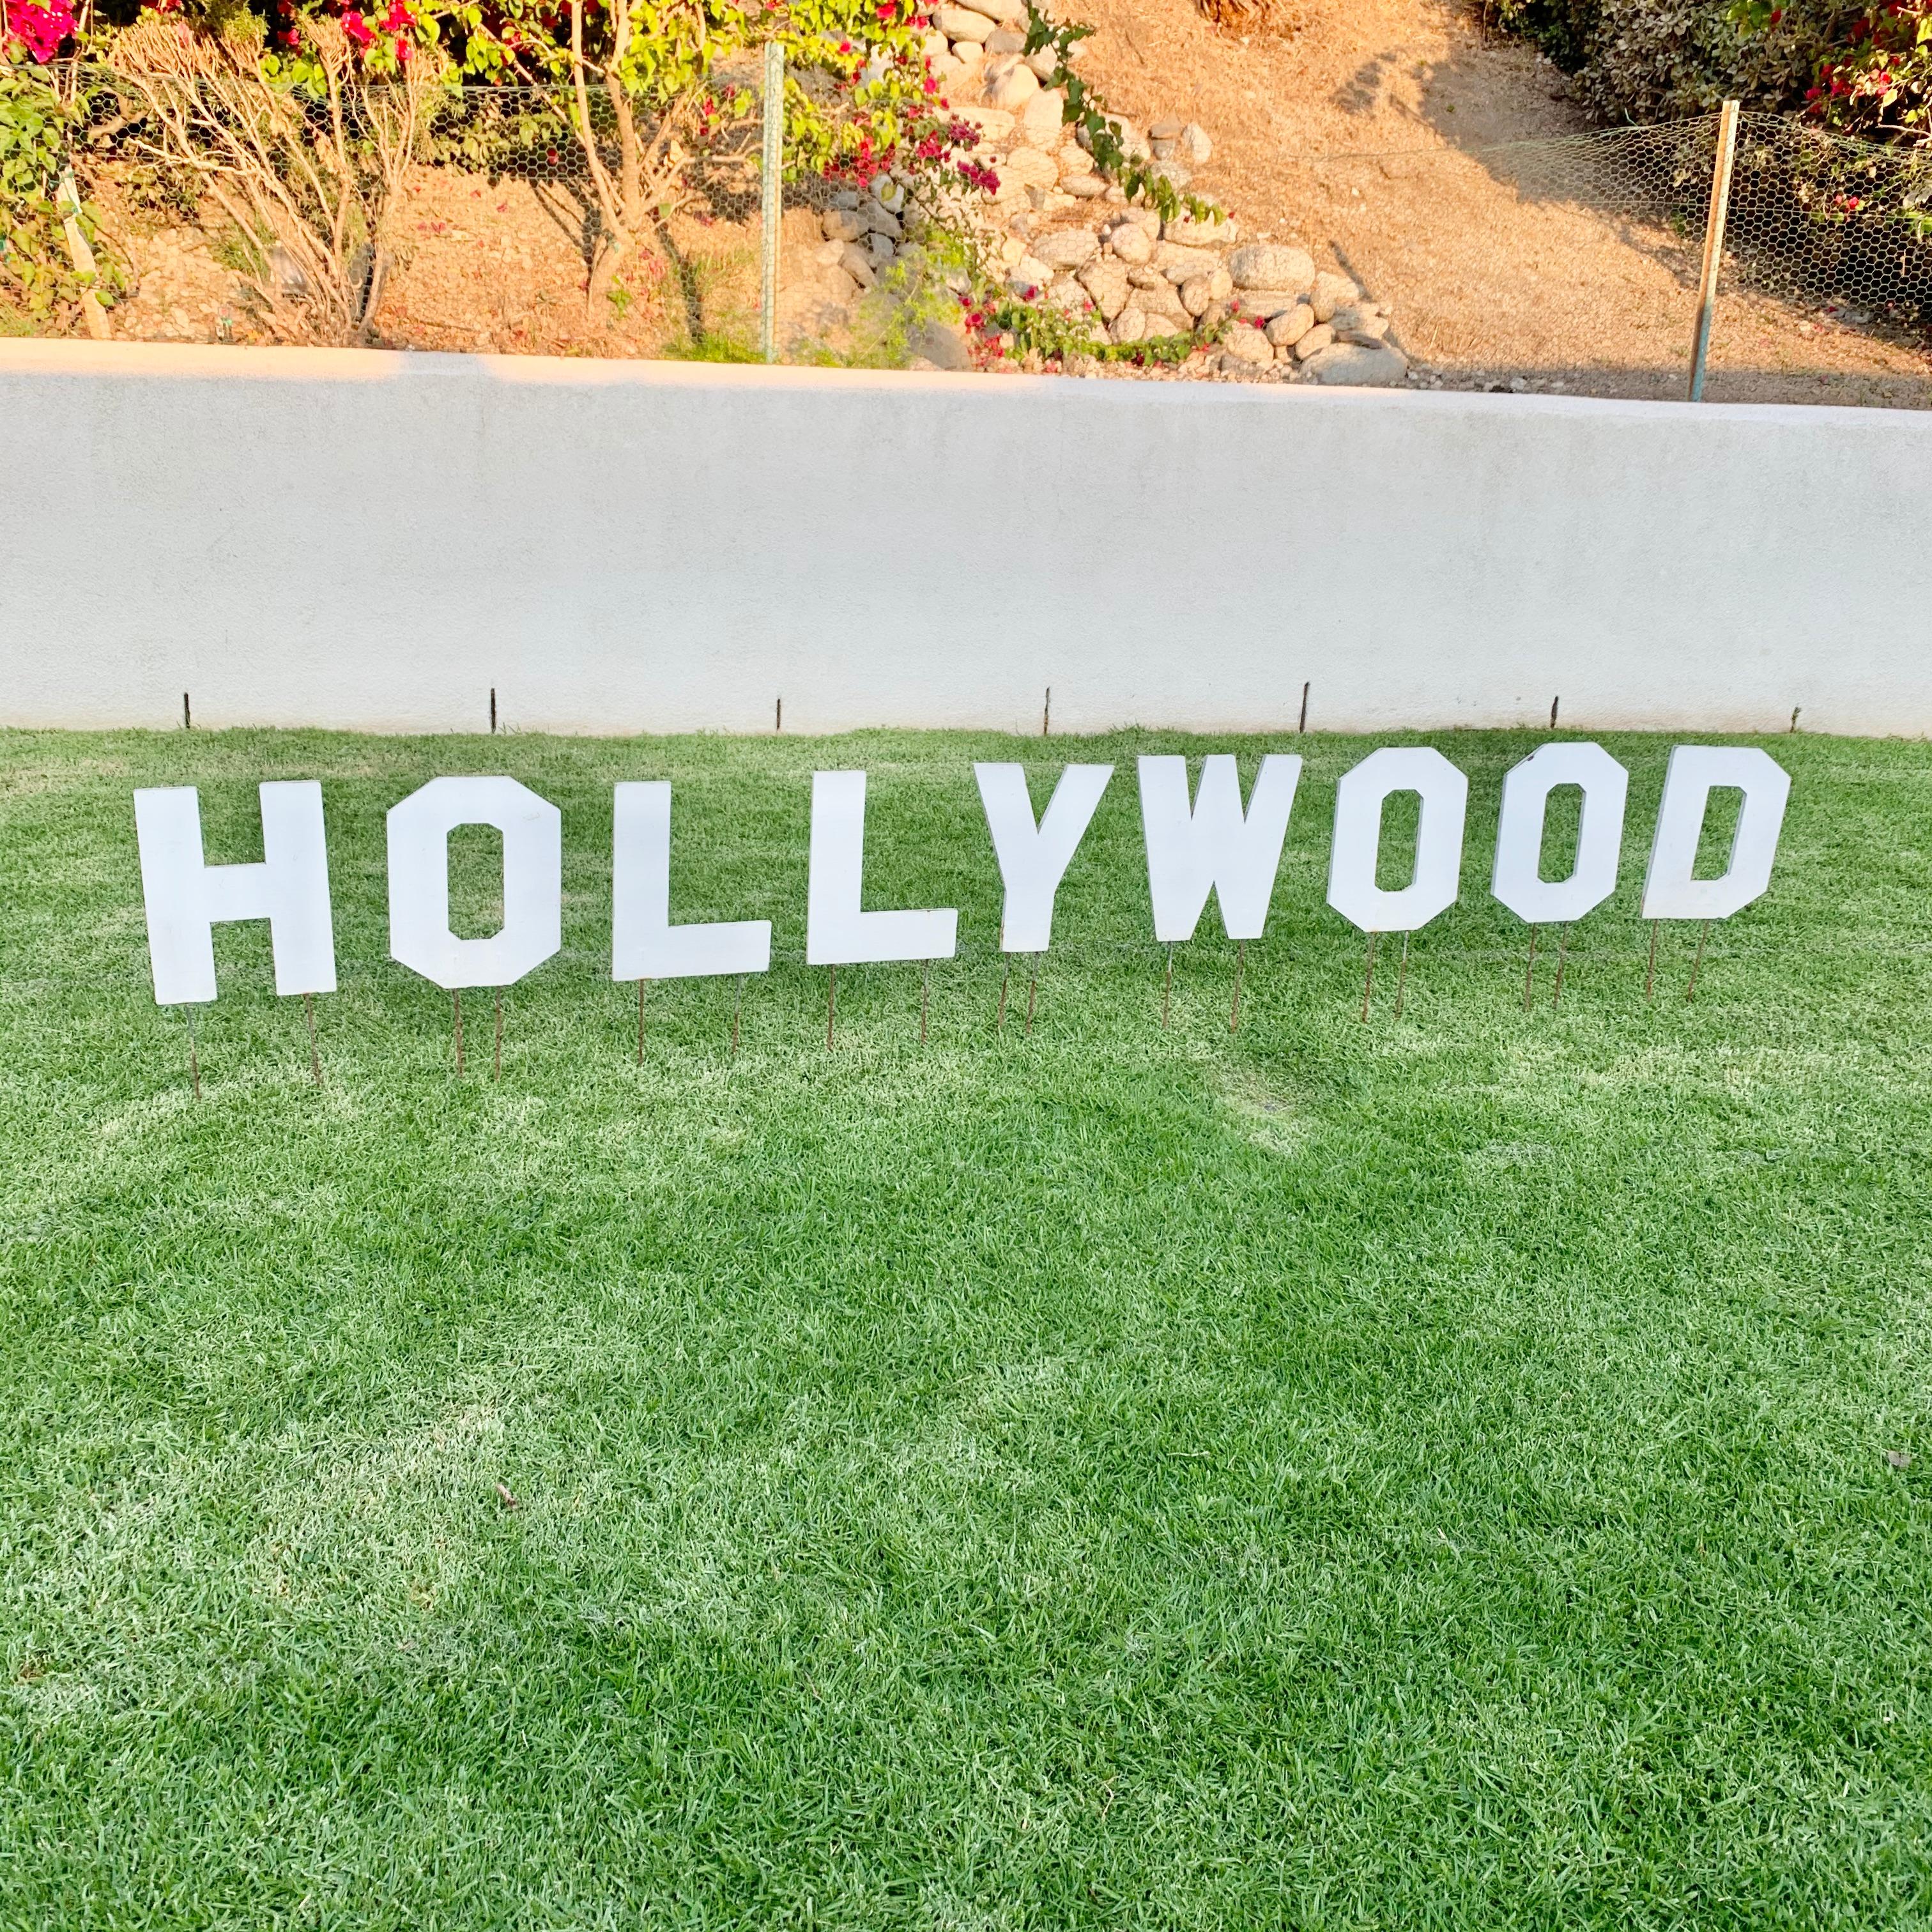 hollywood sign school project